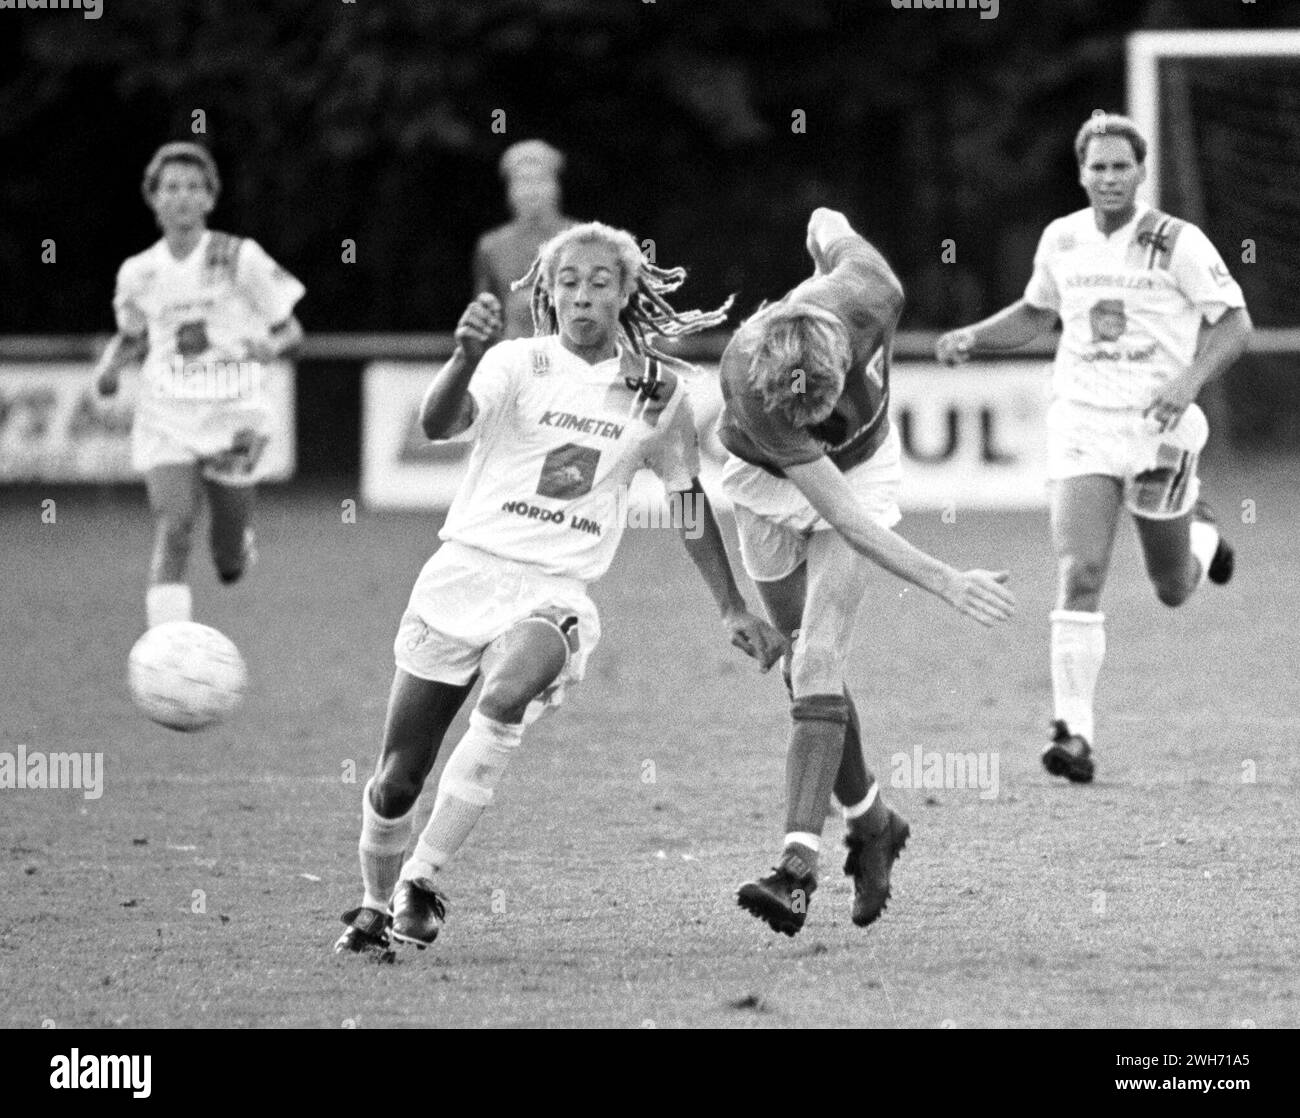 Helsingborg, Sweden,1990-08-10, Henrik Larsson, former football player in the Swedish national team and professional in Celtics, Scotland. Here playing in his first club Hogaborg in the south of Sweden. Foto: Johan Persson /HD / TT Code 40855 Stock Photo